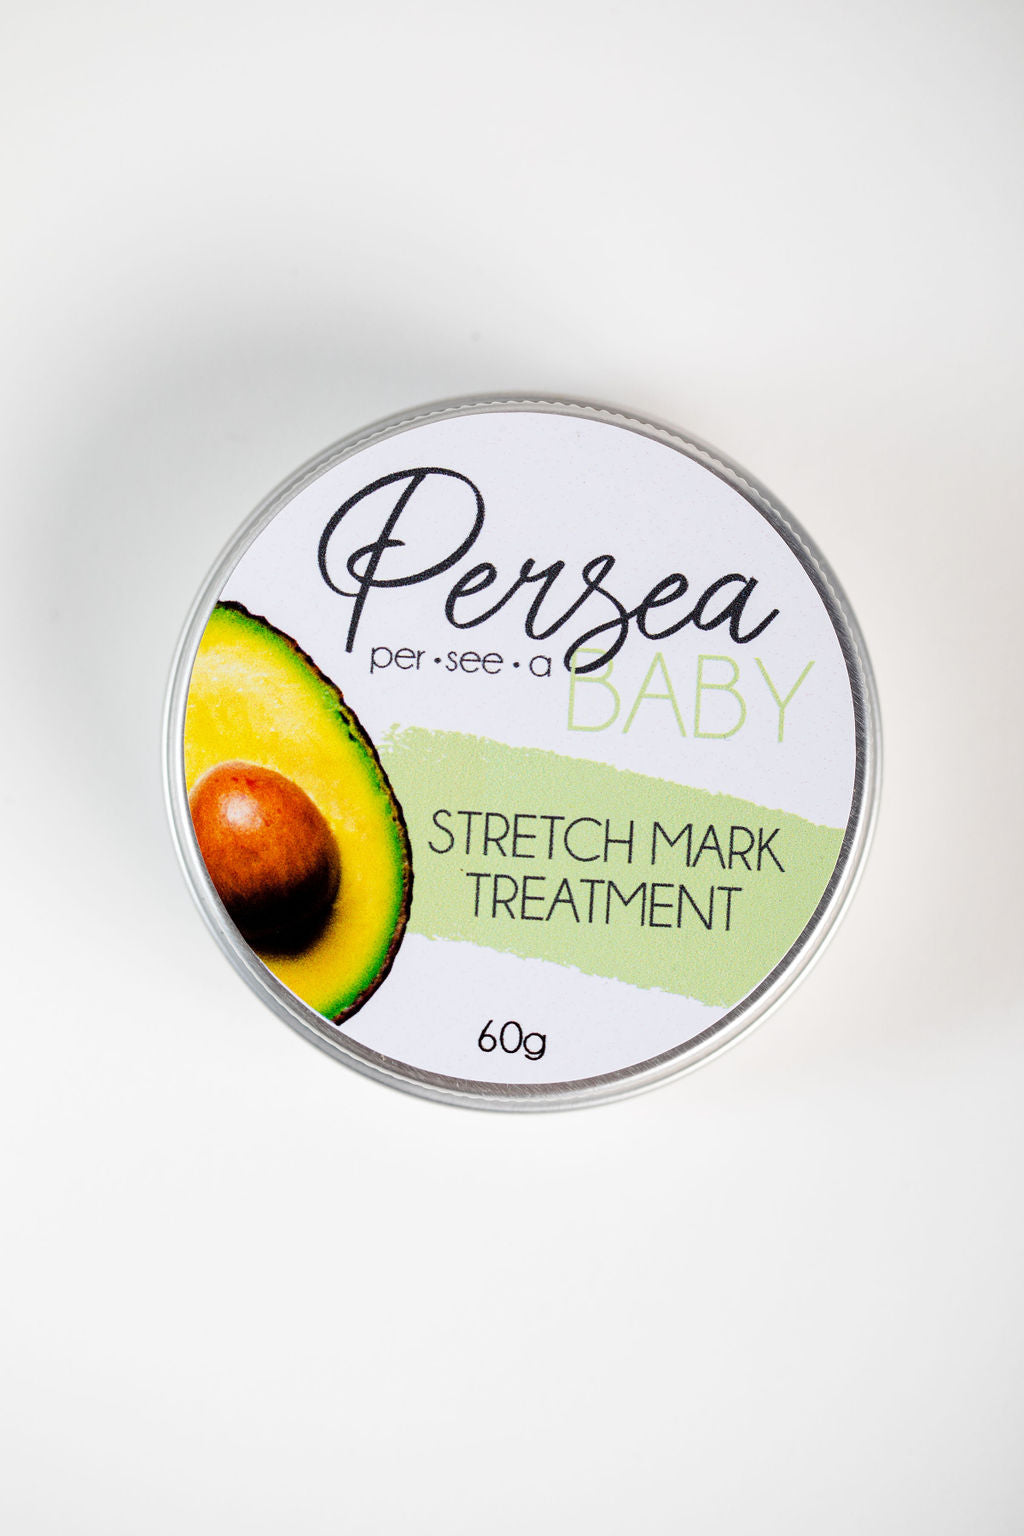 Persea Avo Stretch Mark Treatment. Make those stretchmarks disappear. 